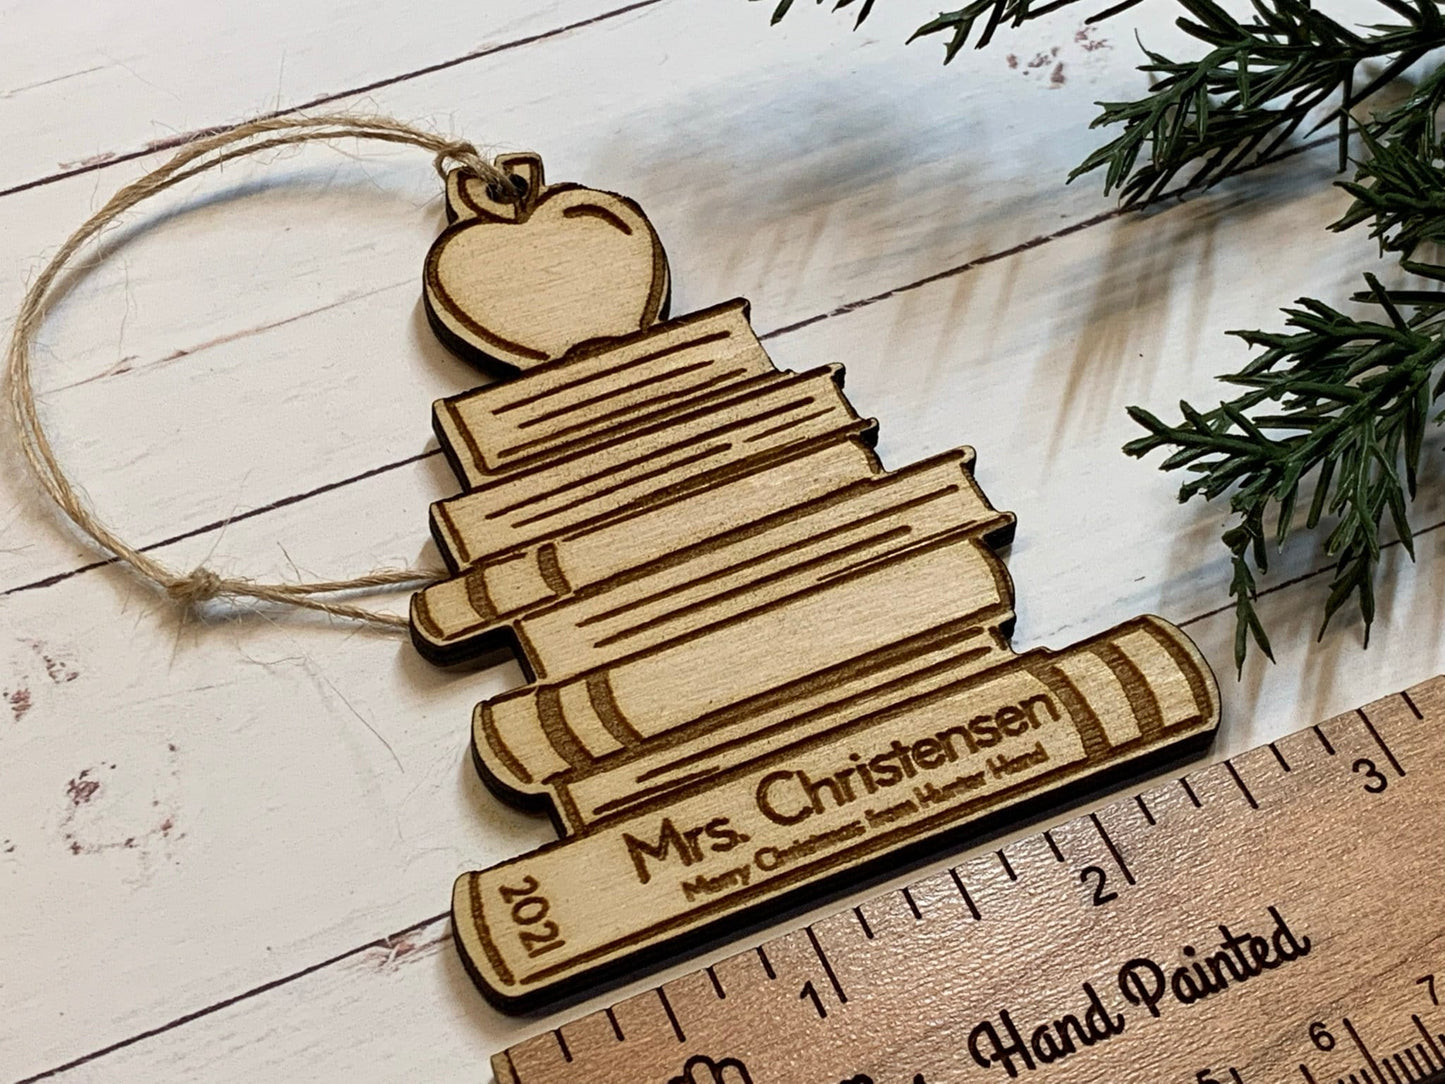 Laser Cut Wood Book Stack with an Apple Ornament - Personalized Teacher Gift, Gift for Librarian or Teacher